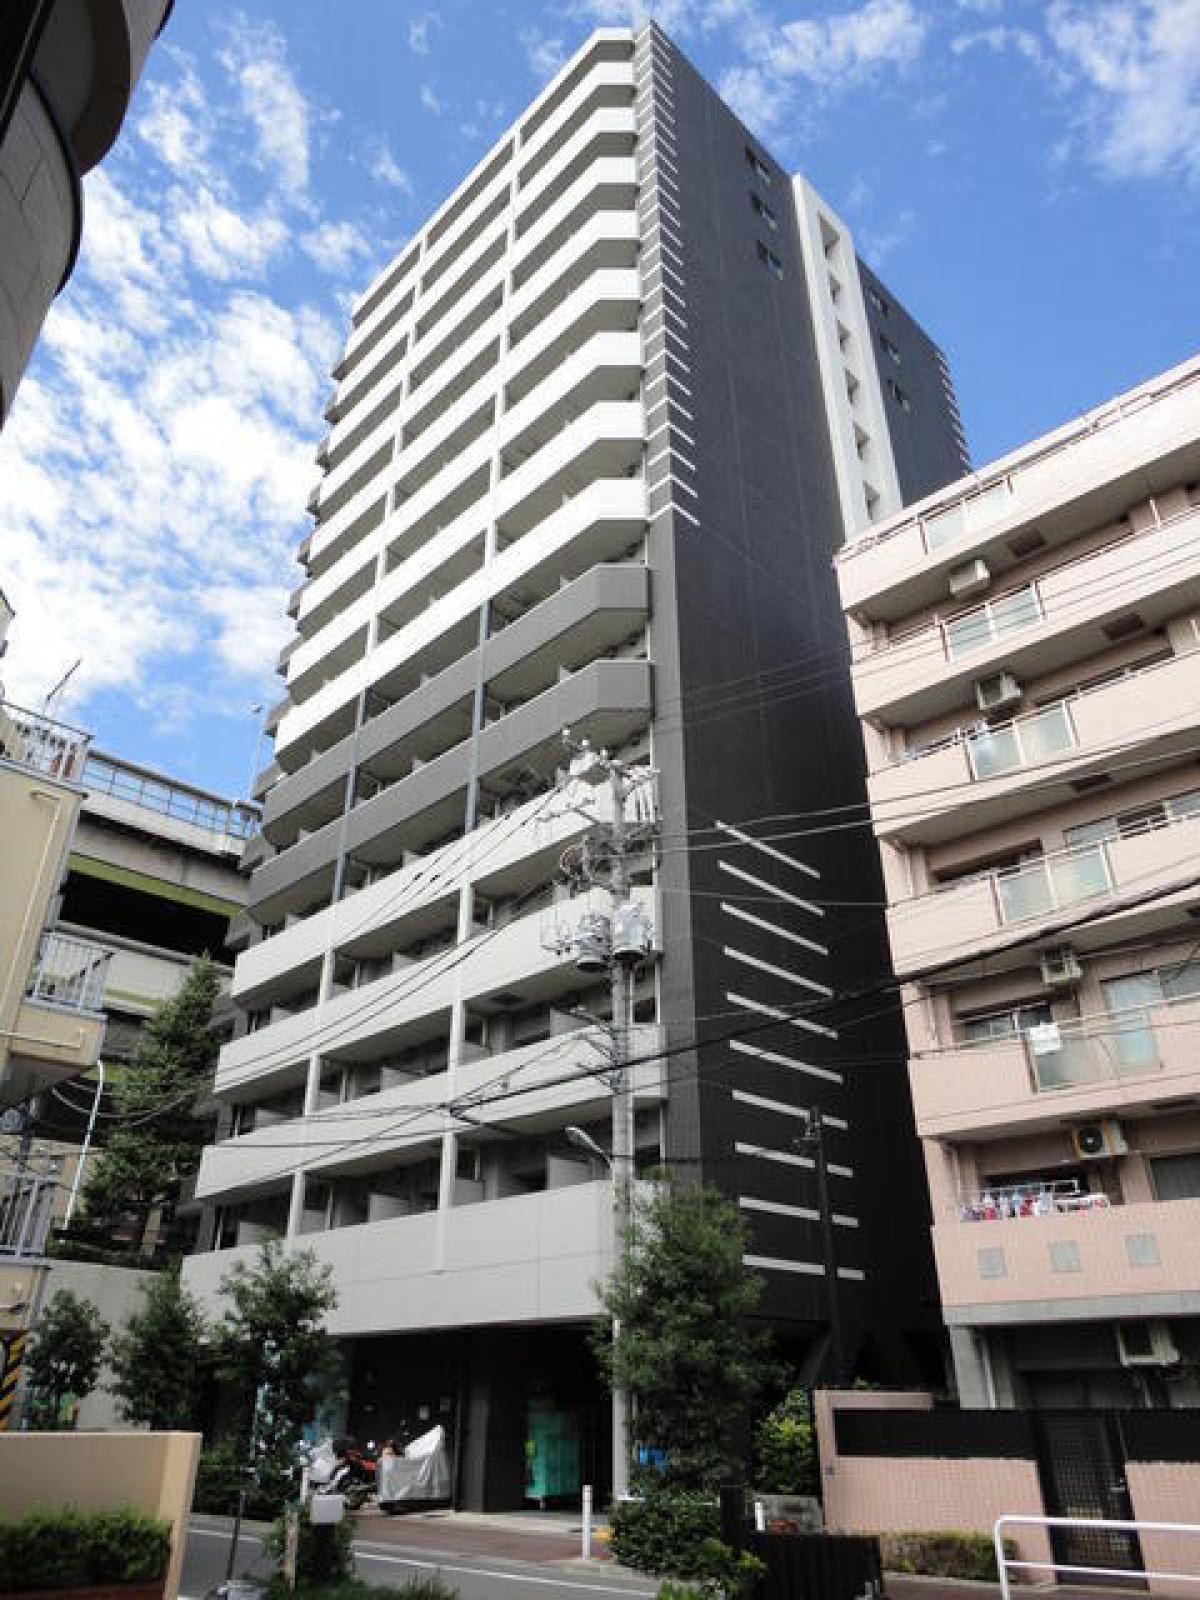 Picture of Apartment For Sale in Itabashi Ku, Tokyo, Japan